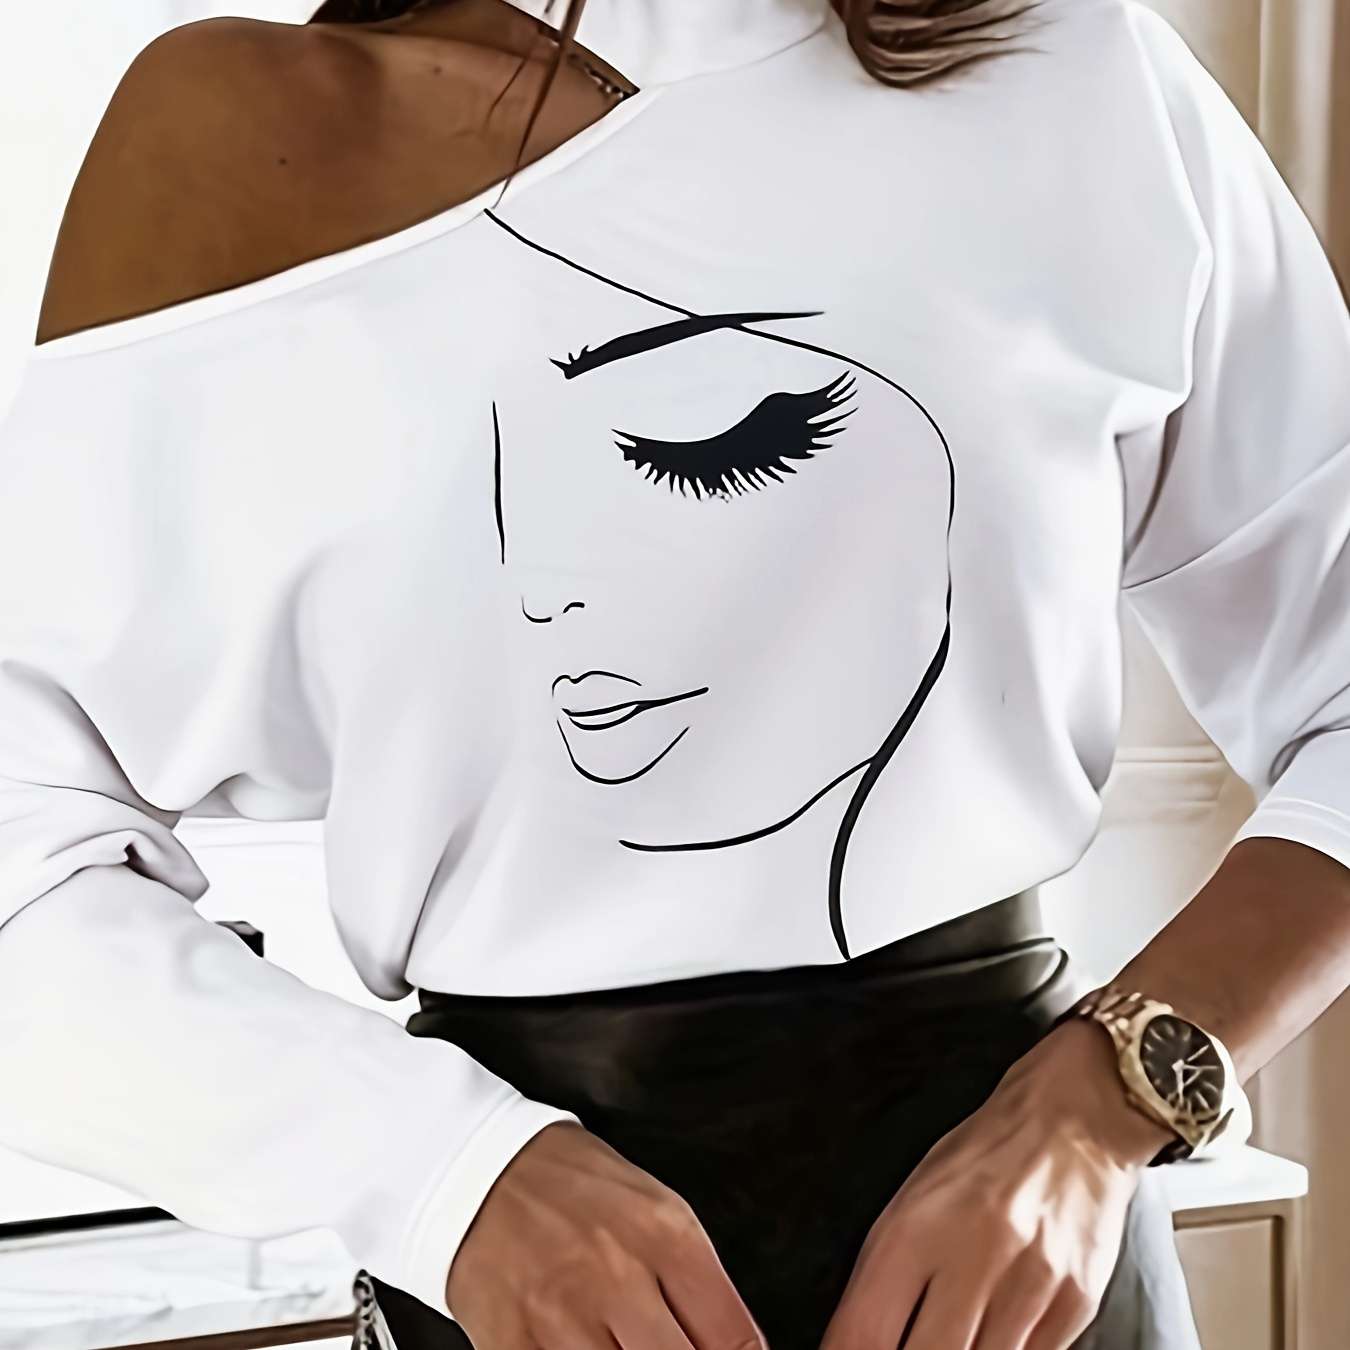 

Abstract Face Print T-shirt, Casual Cut Out Long Sleeve T-shirt, Women's Clothing